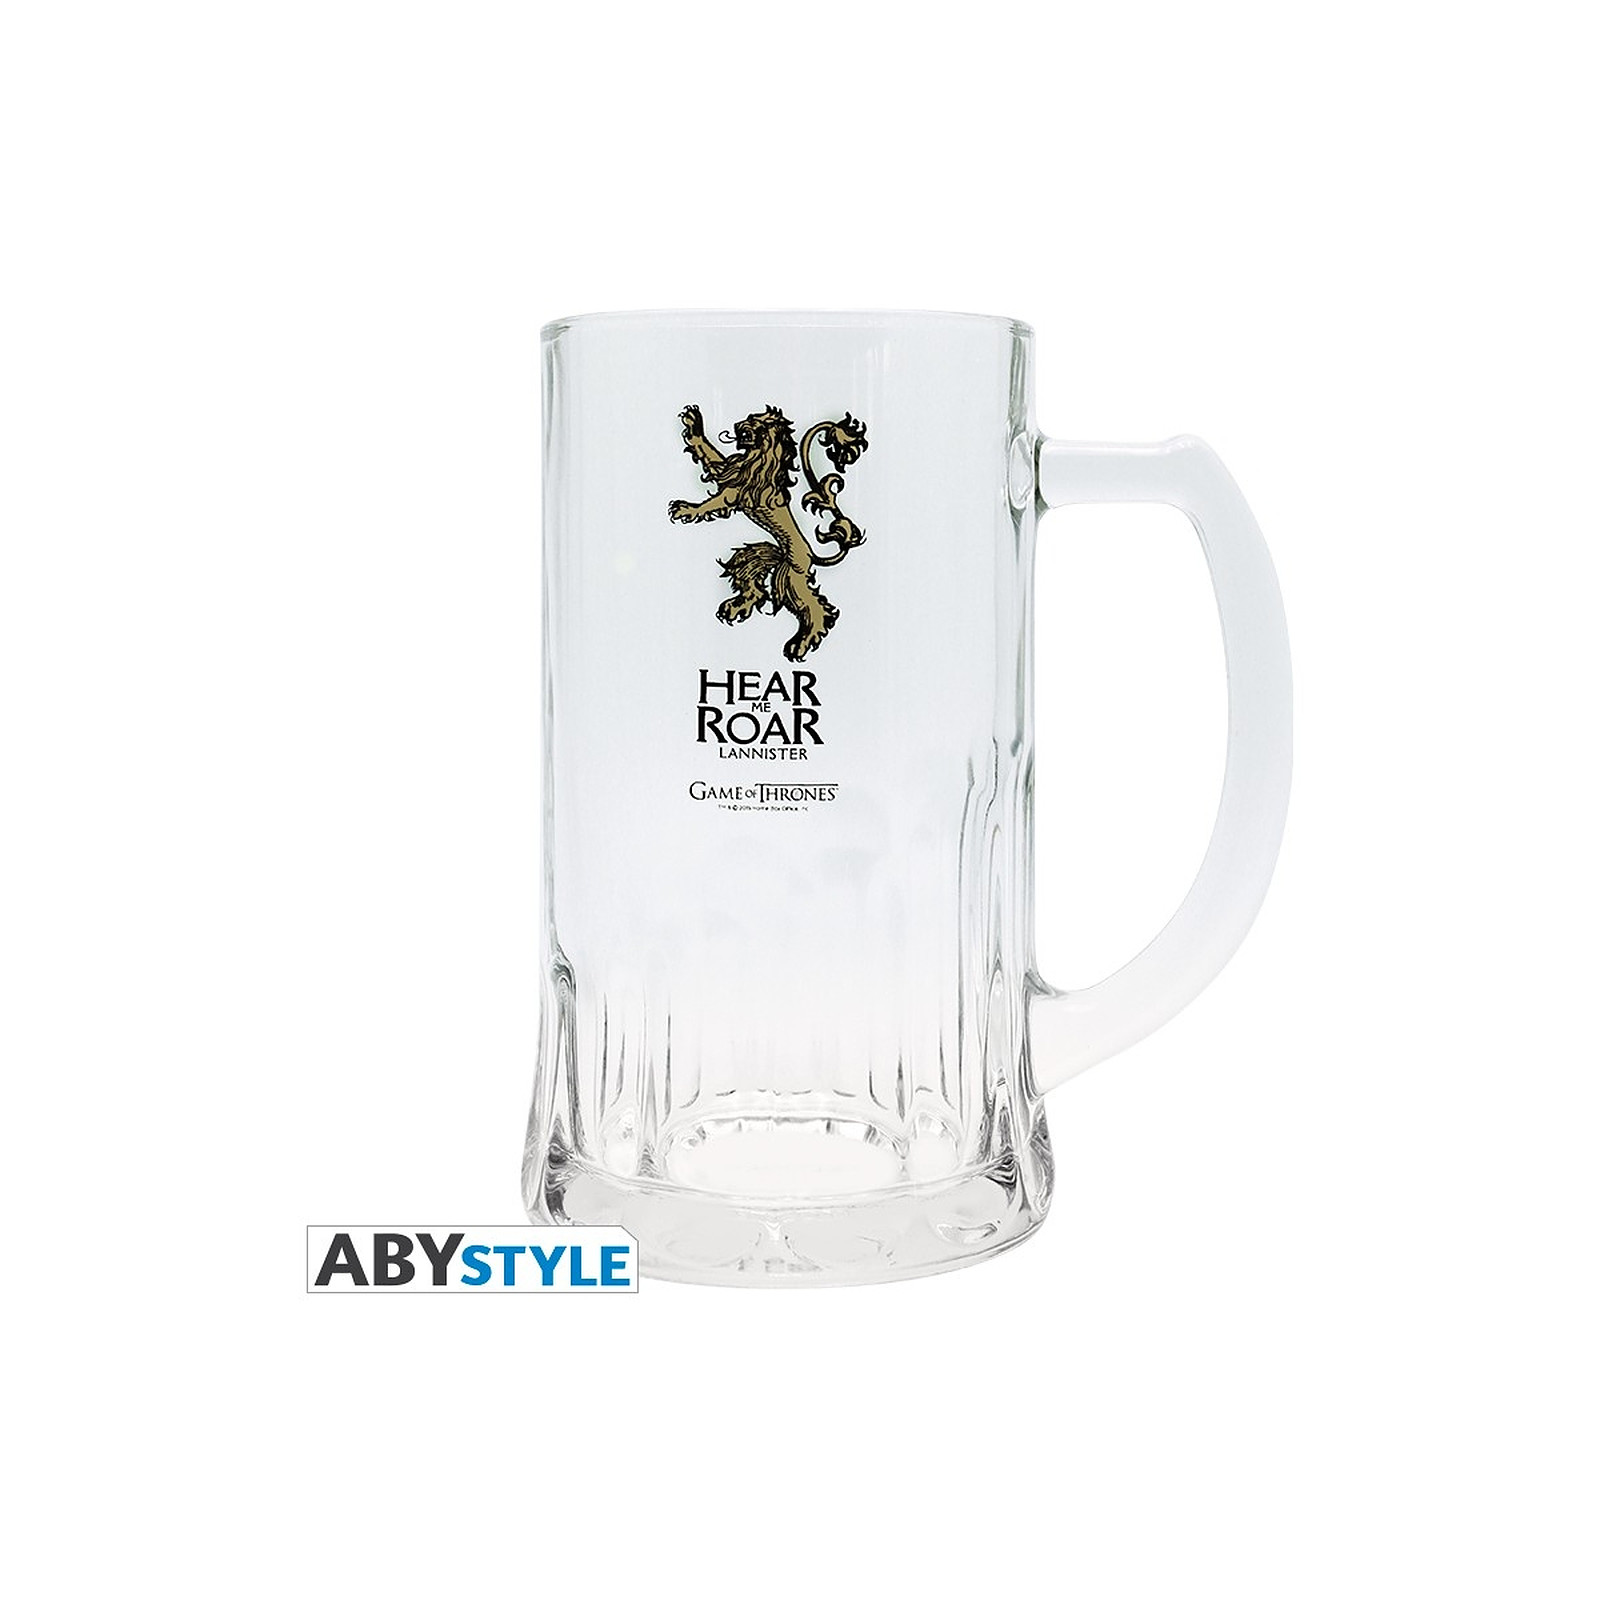 GAME OF THRONES - Chope Lannister - Vaisselle Abystyle